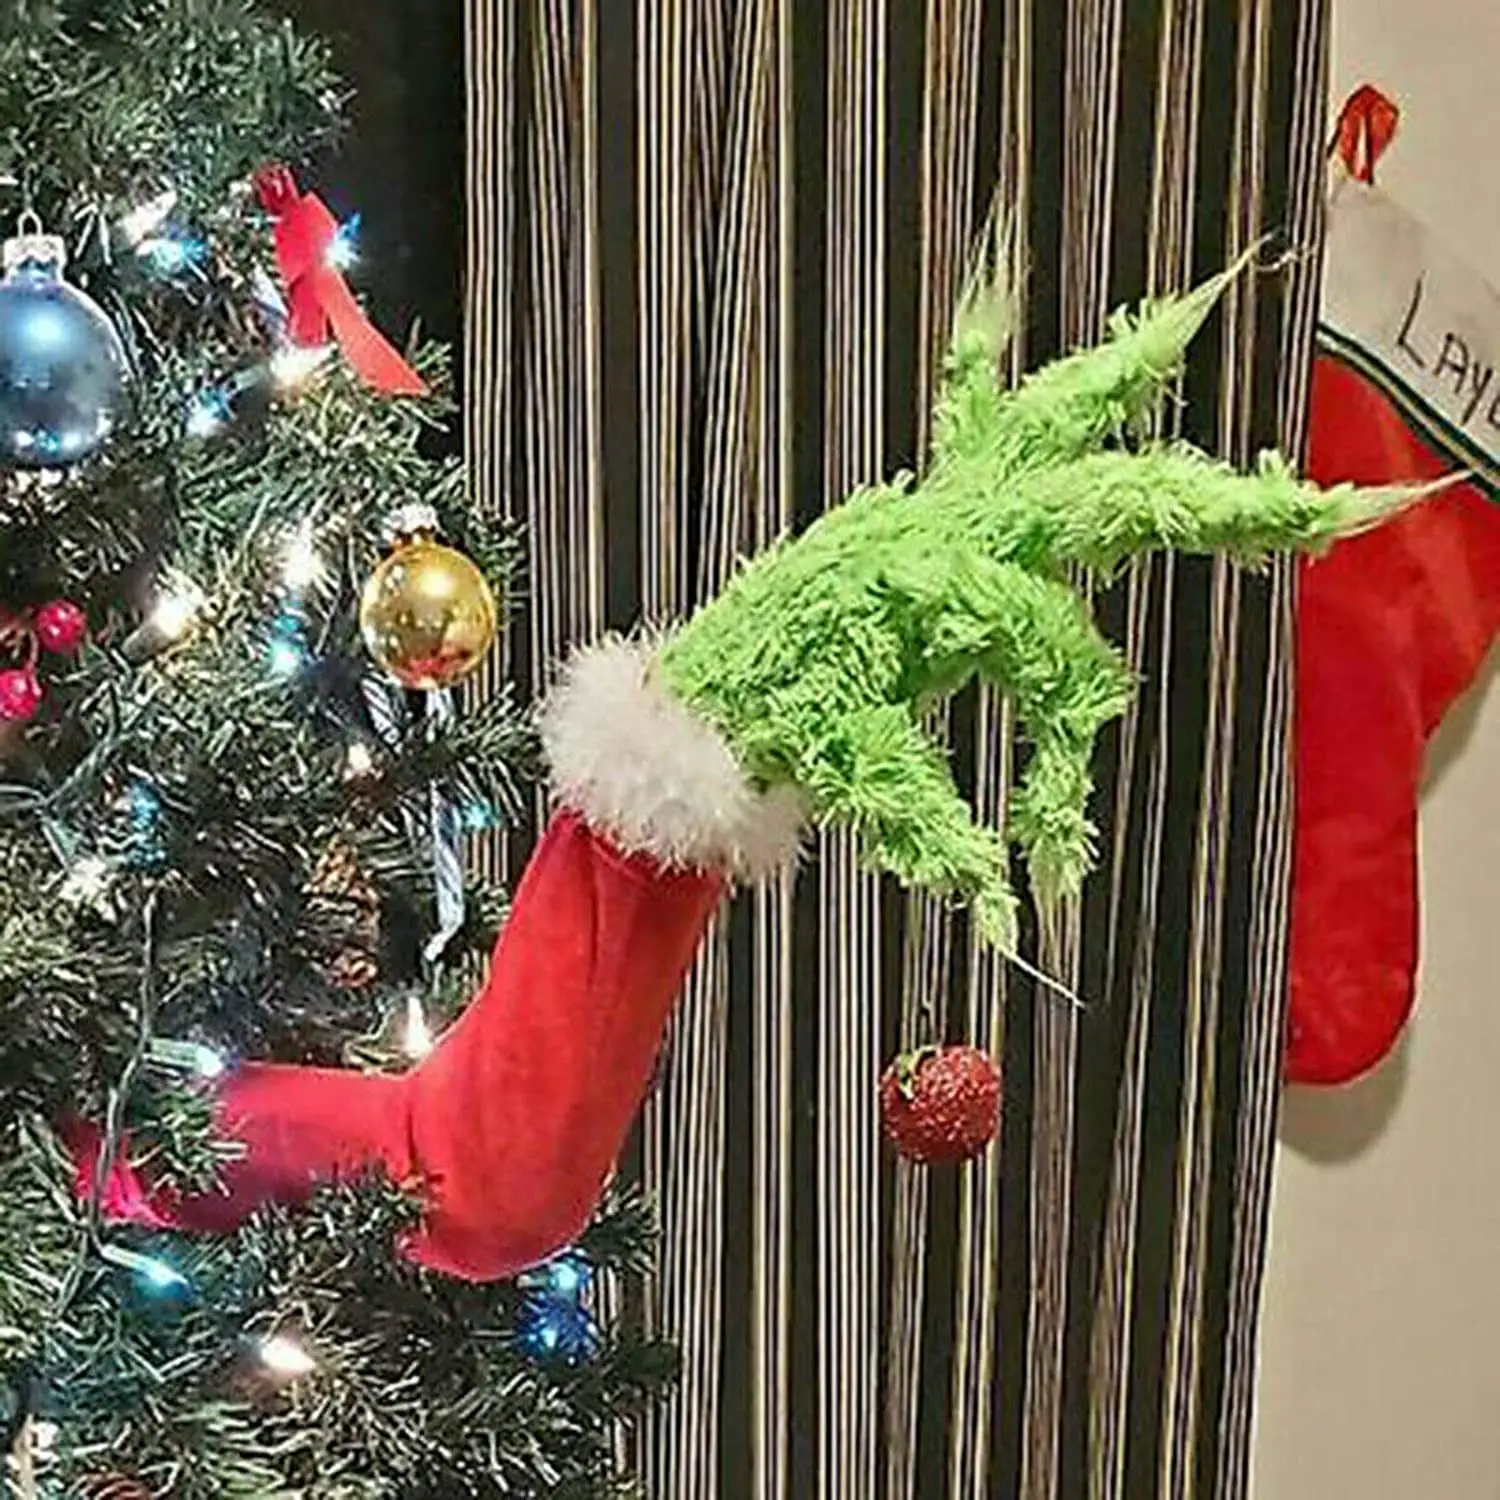 Furry Green Arm for Christmas Tree Decorations Grinch Tree Topper The Dr. Seuss Grinch Ornaments for Christmas Party